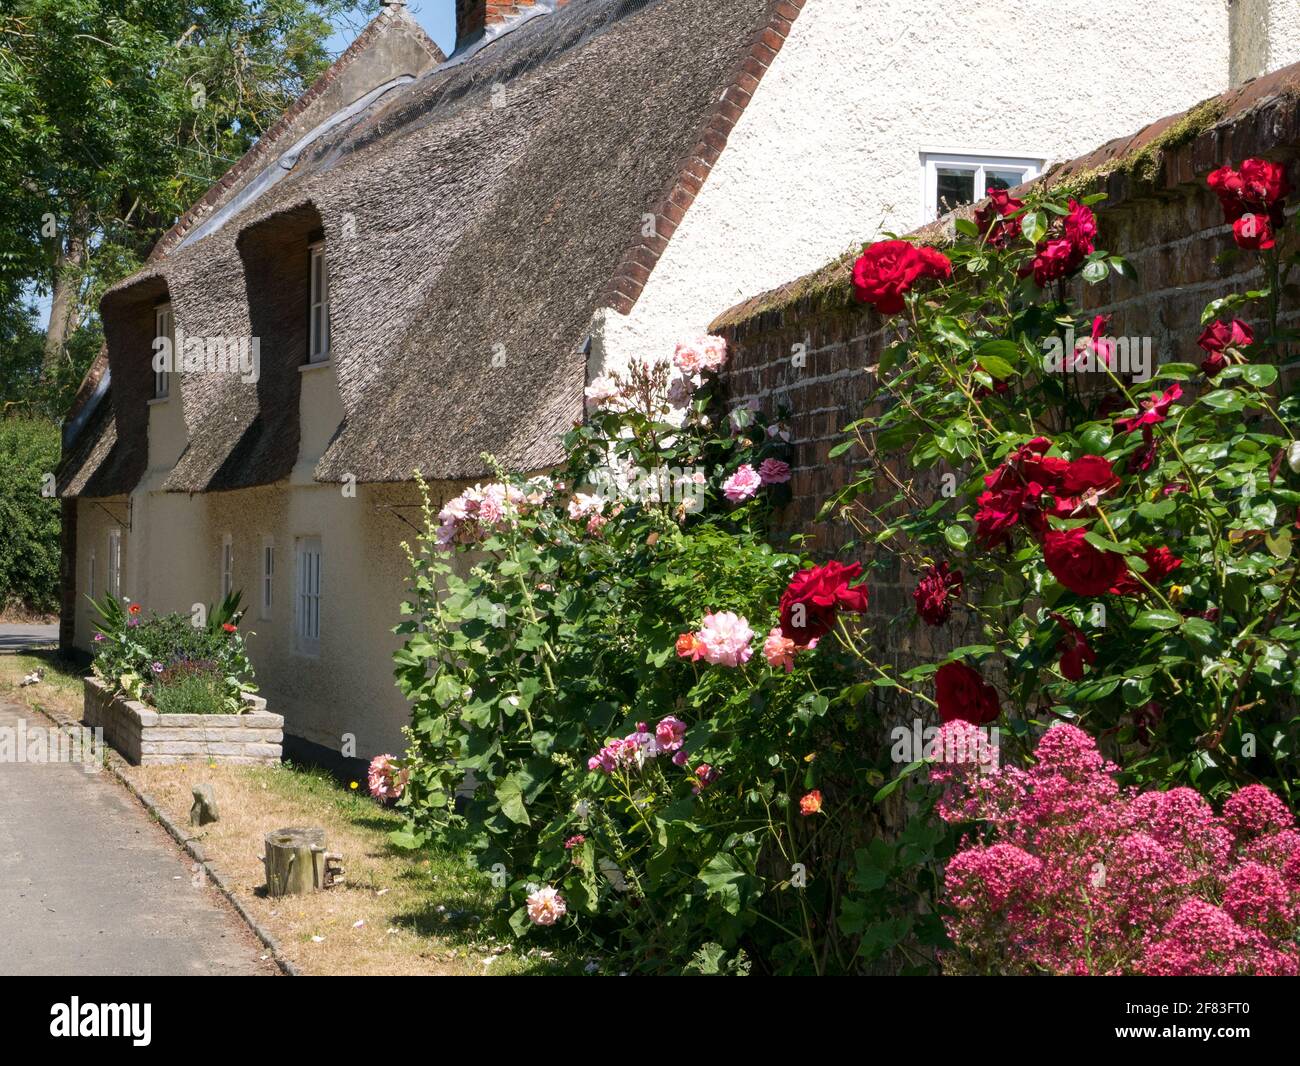 Rural Thatched Cottage with Colourful Summer Garden Plants, in the hamlet of St James, Coltishall, Norfolk, England, UK Stock Photo